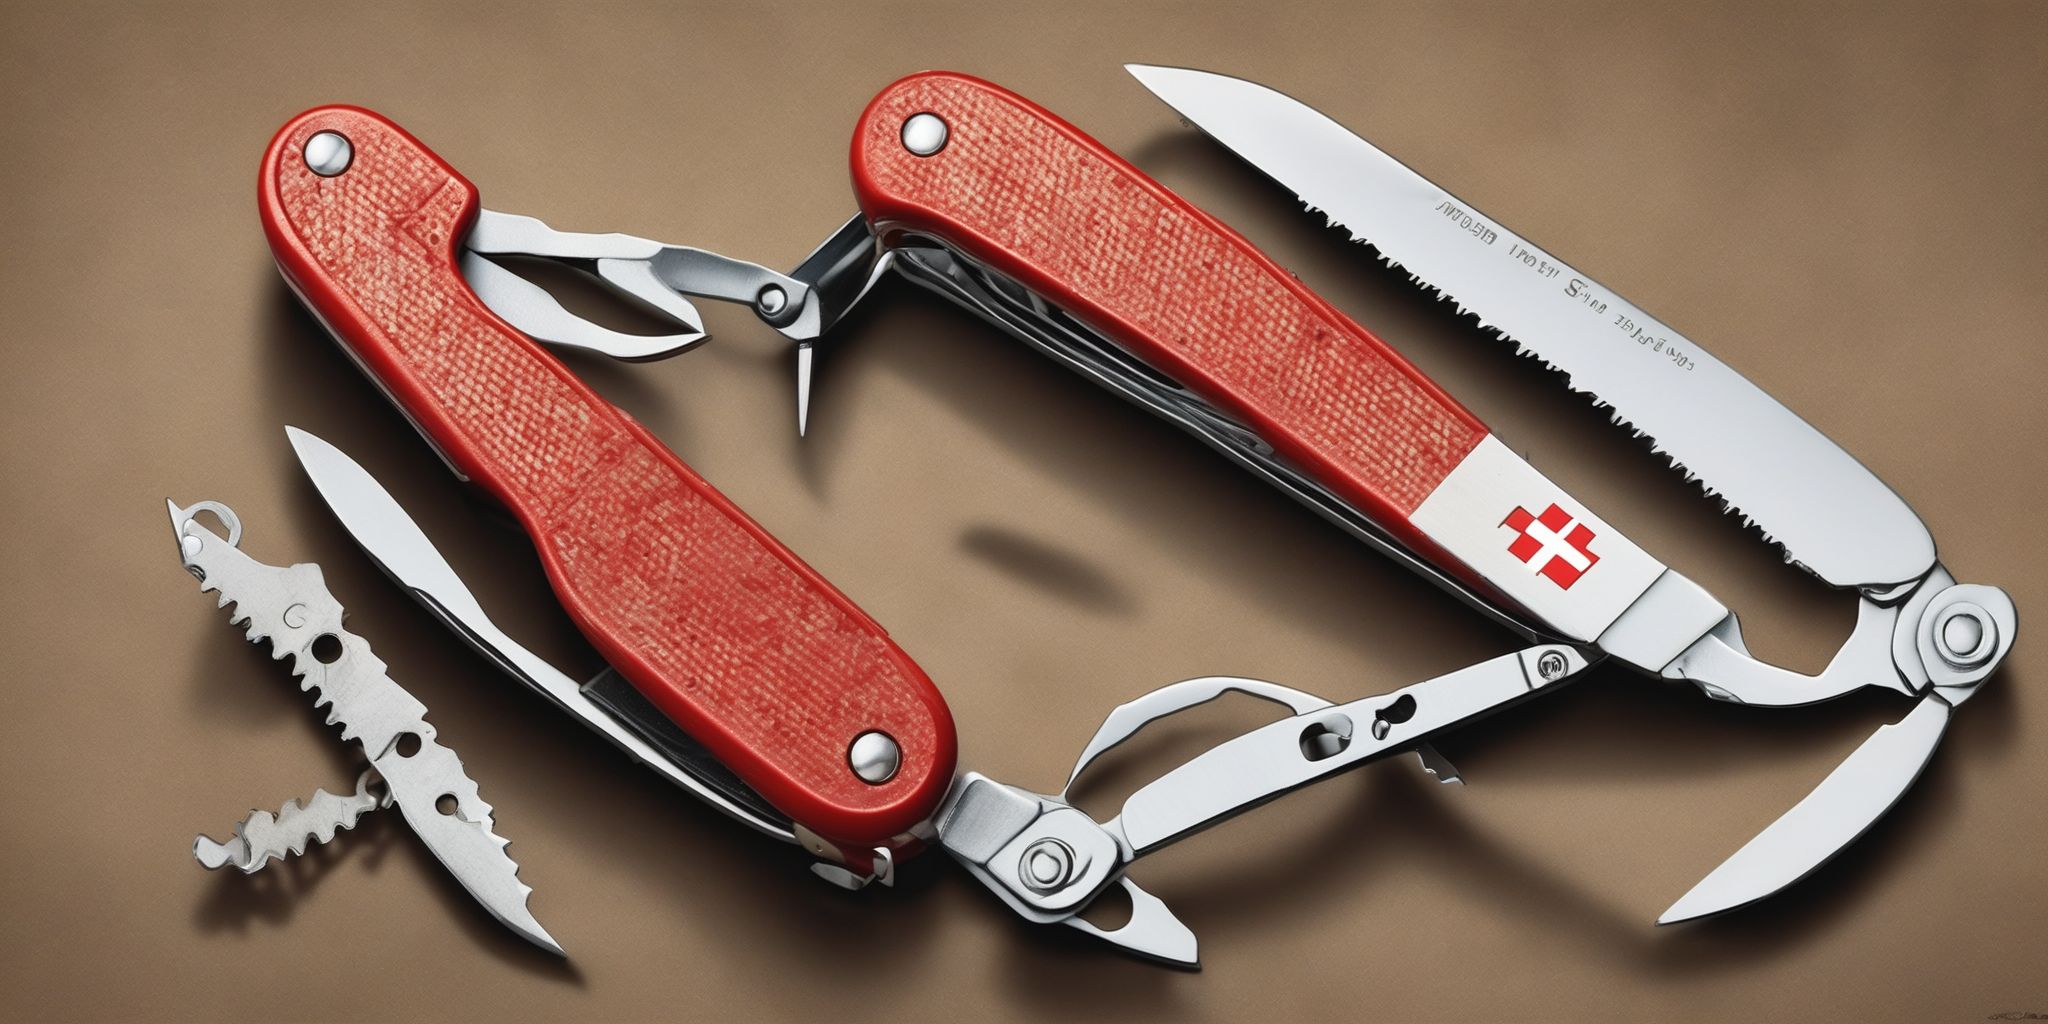 Swiss Army Knife  in realistic, photographic style